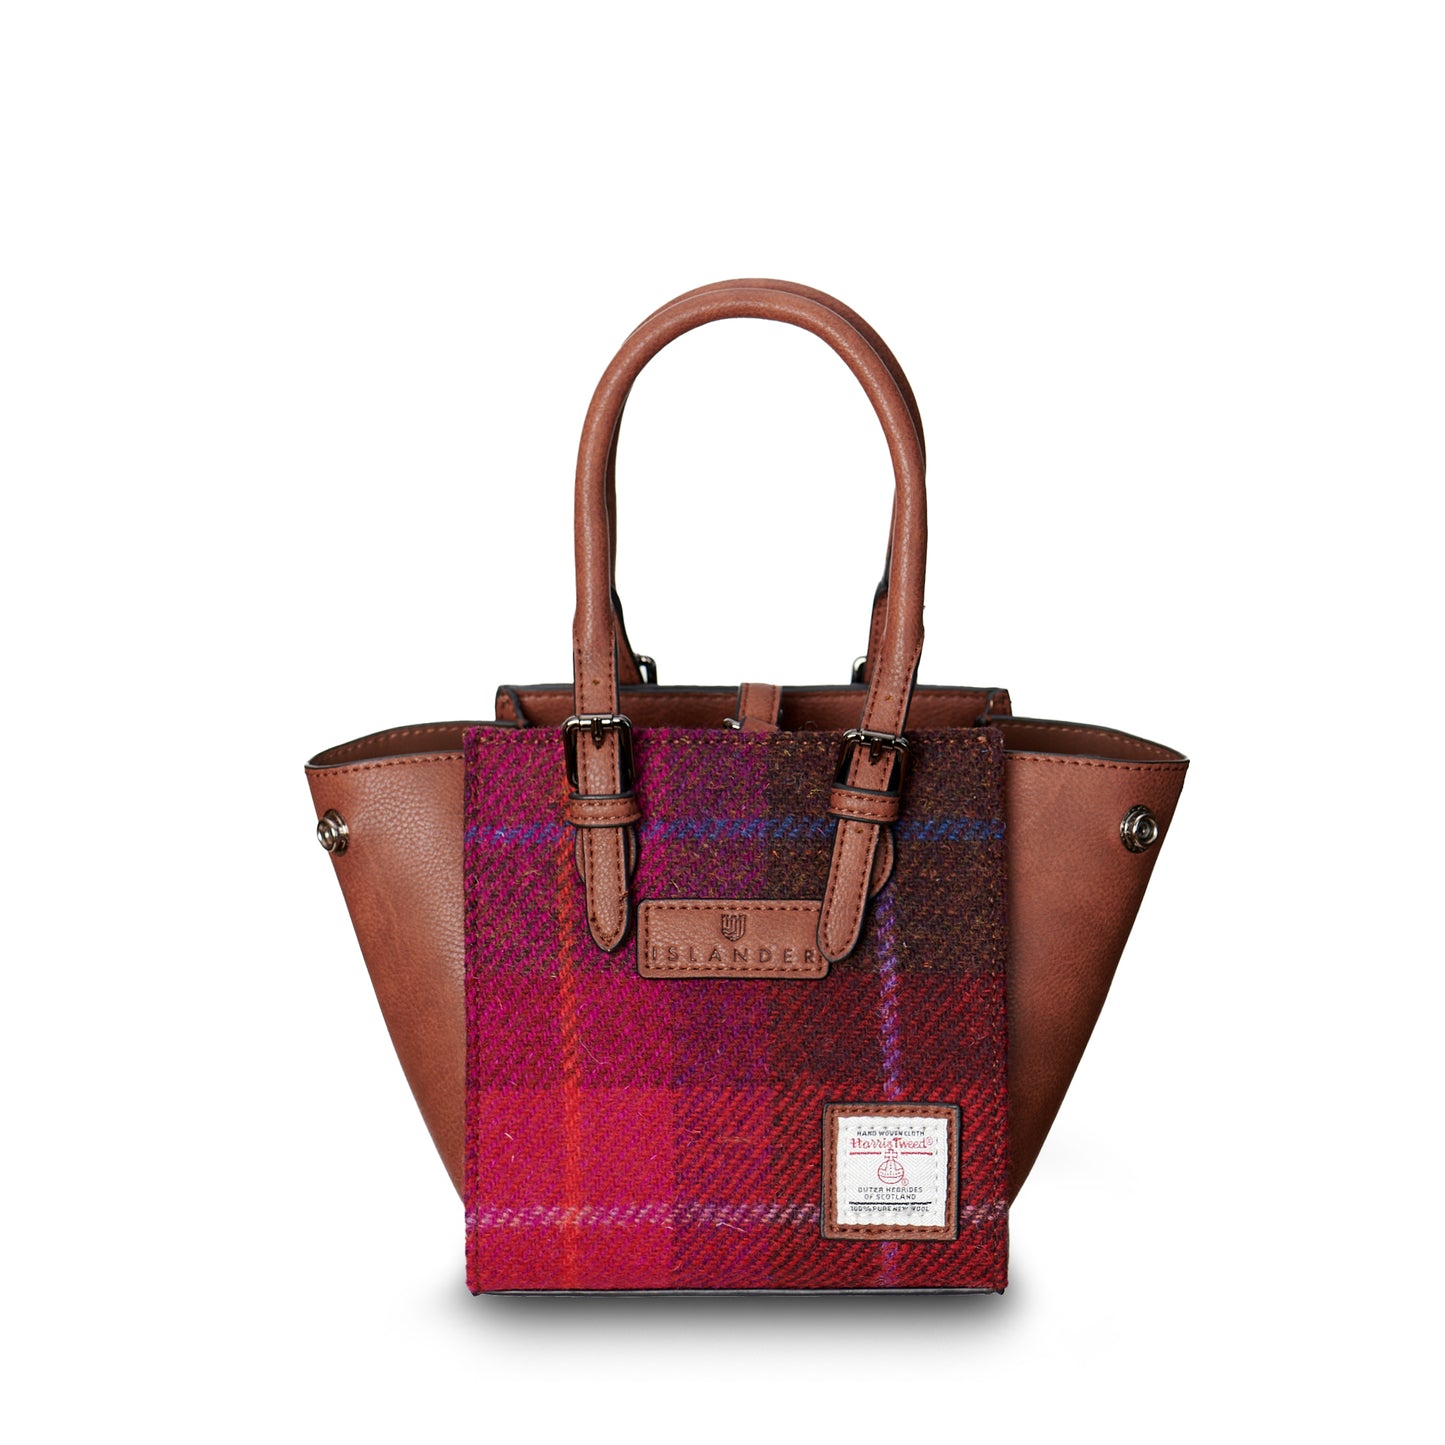 The Mini Caillie Tote